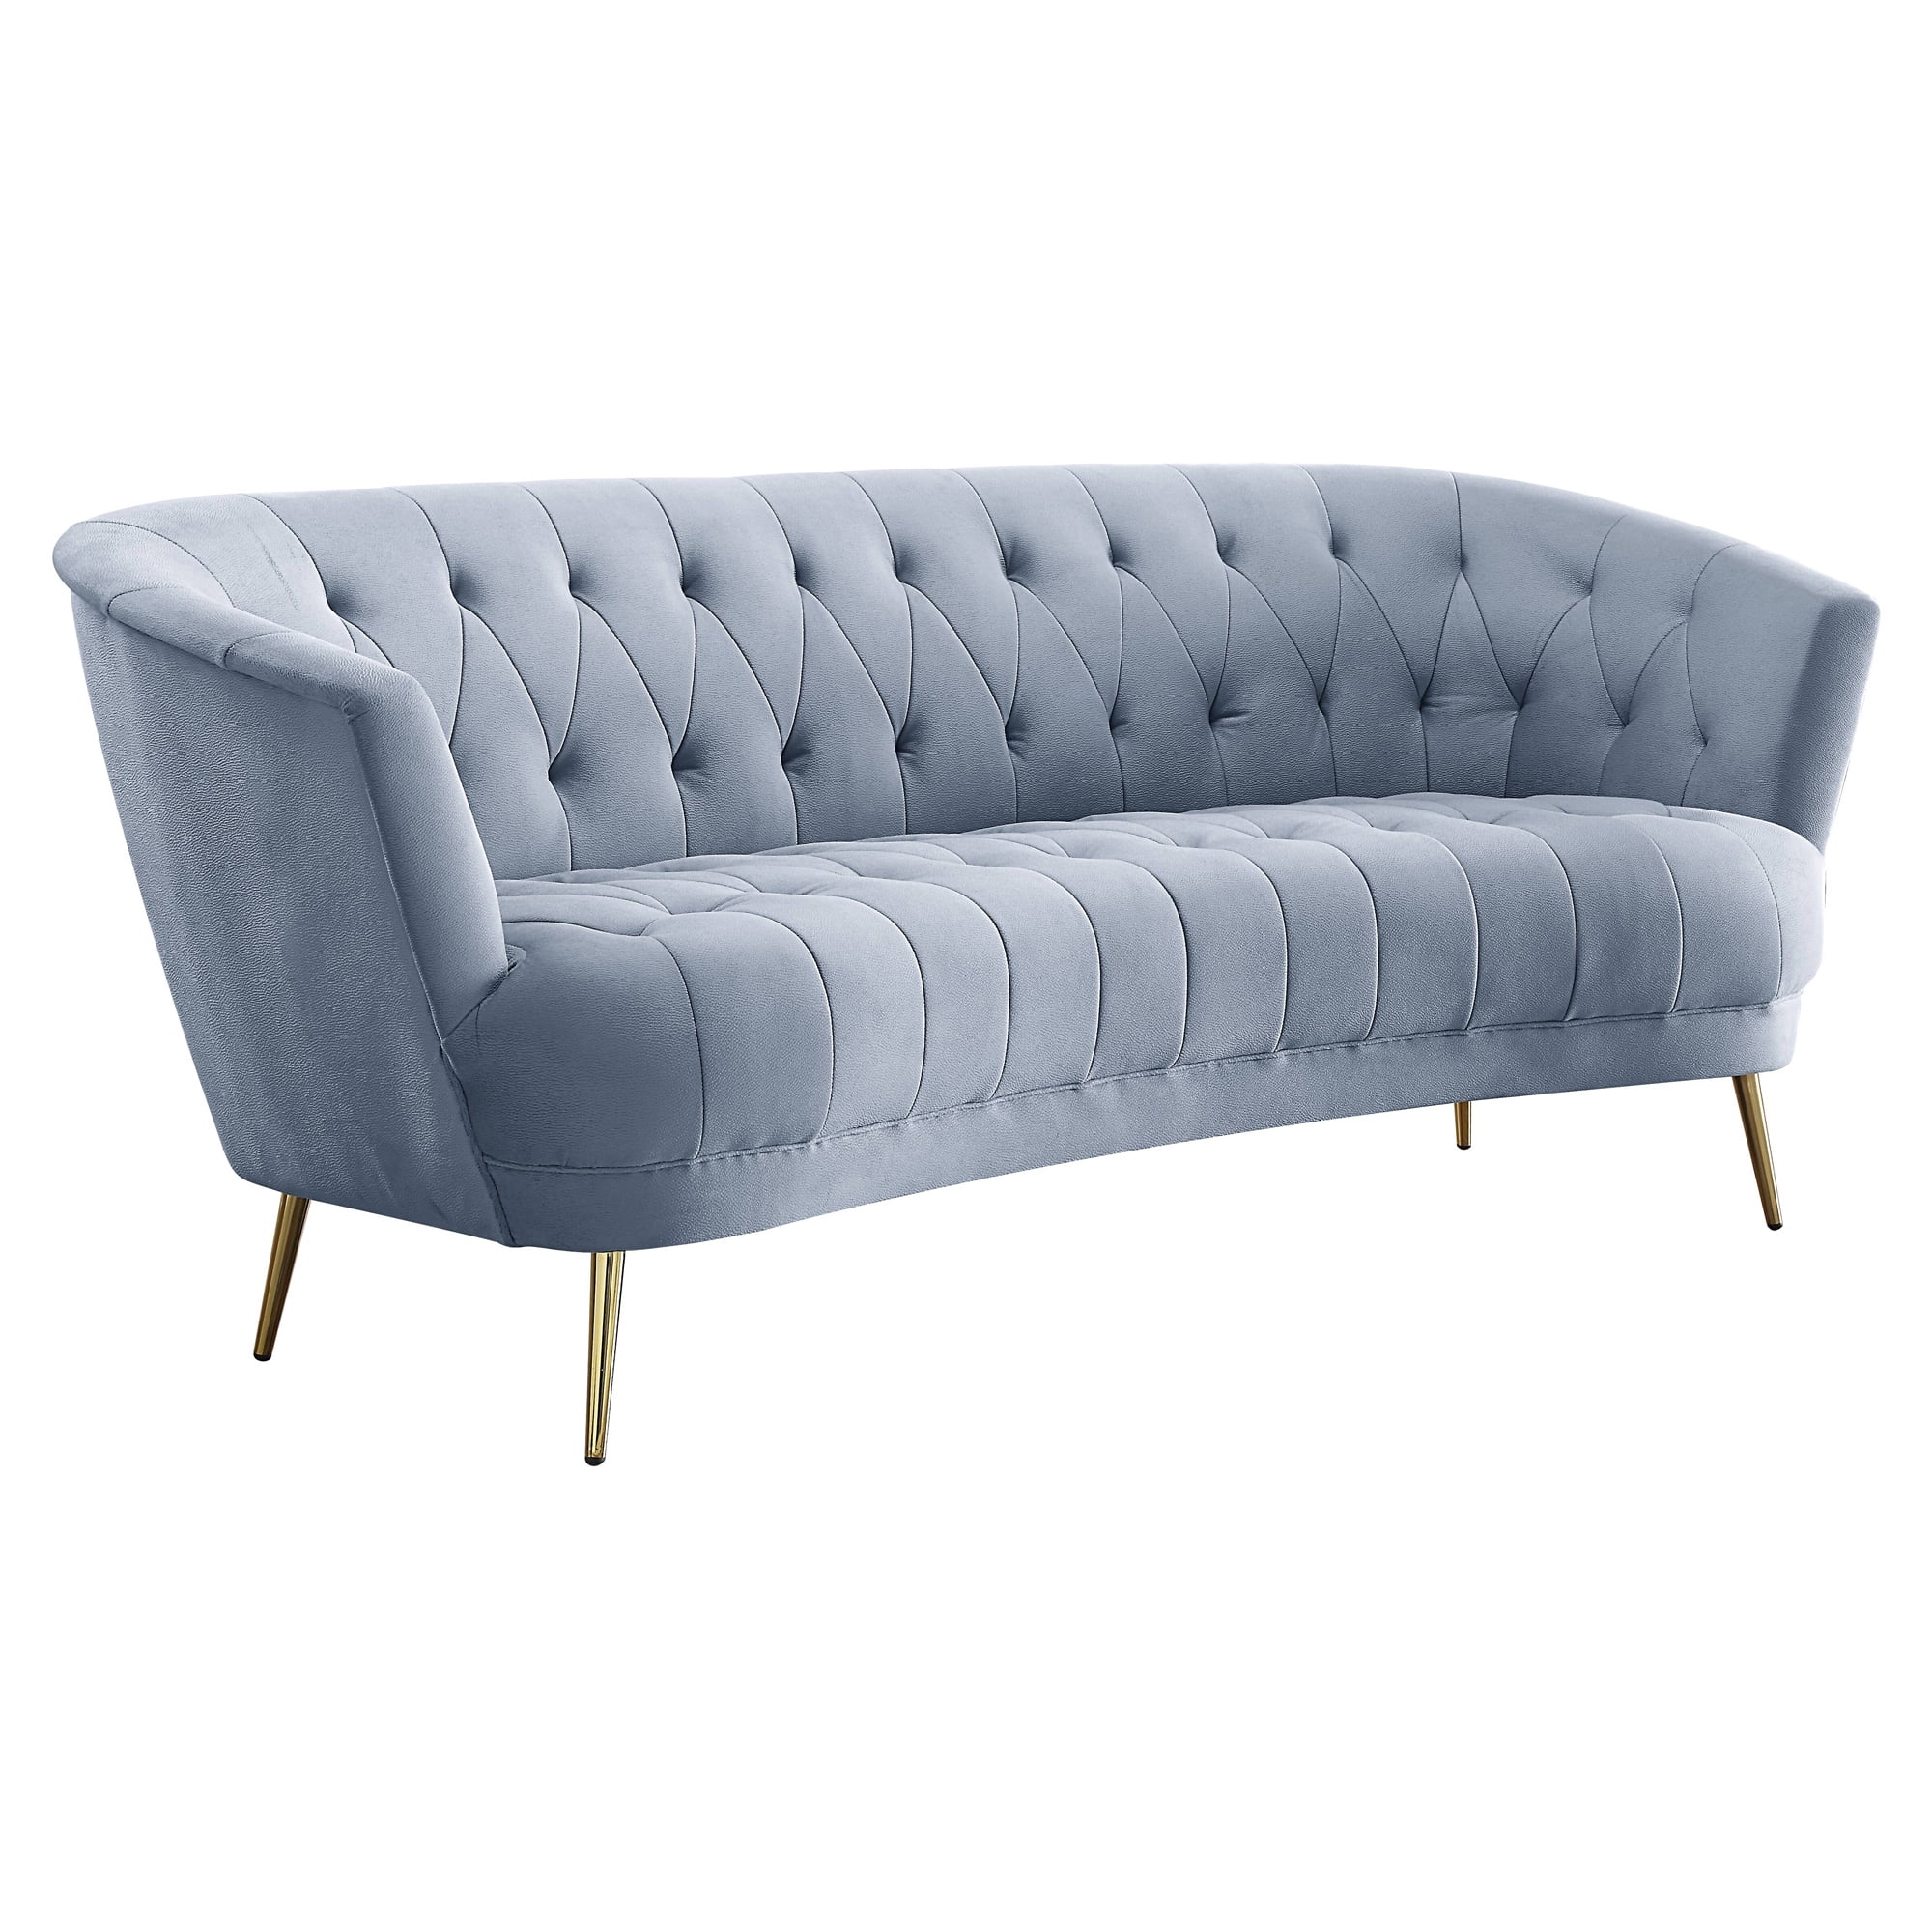 Specified Maiden easy to handle ACME Bayram Sofa in Light Gray - Walmart.com